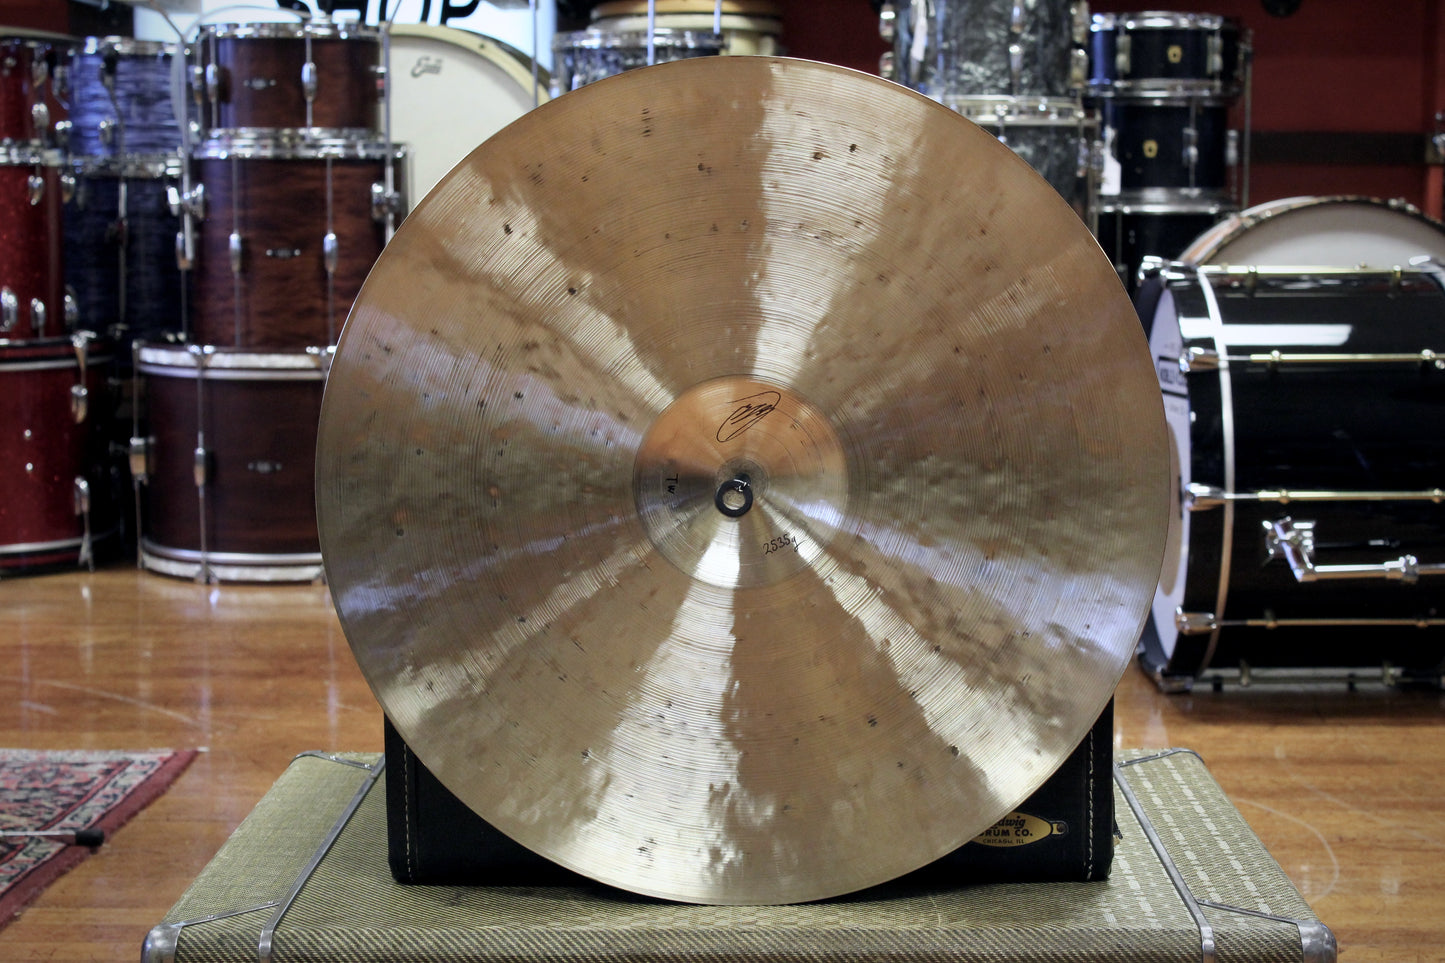 Funch Cymbals 22" Tony Williams Tribute Ride Cymbal 2535g